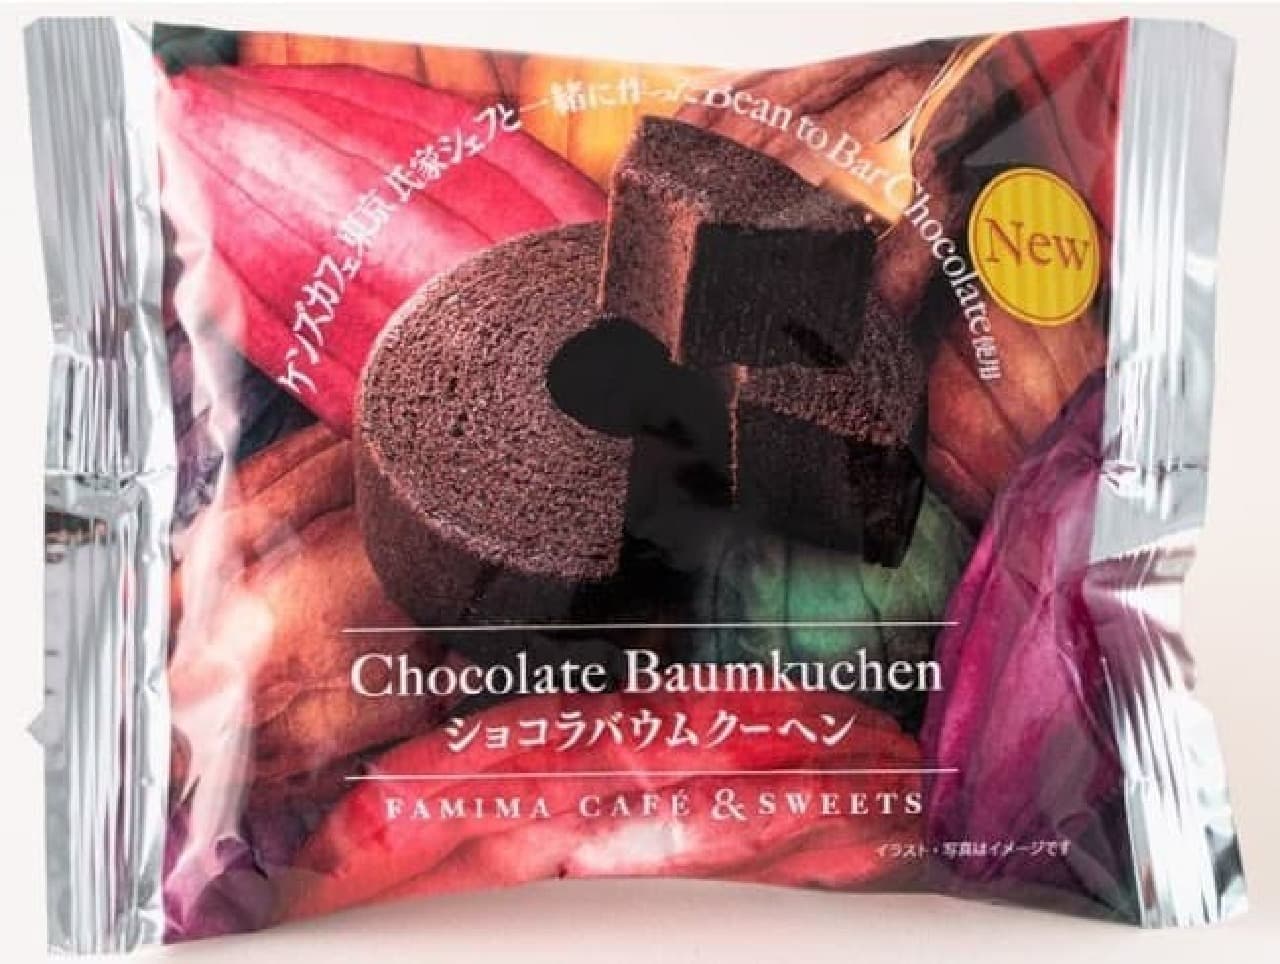 FamilyMart's Ken's Cafe Tokyo Chef Supervised Chocolate Sweets 3rd